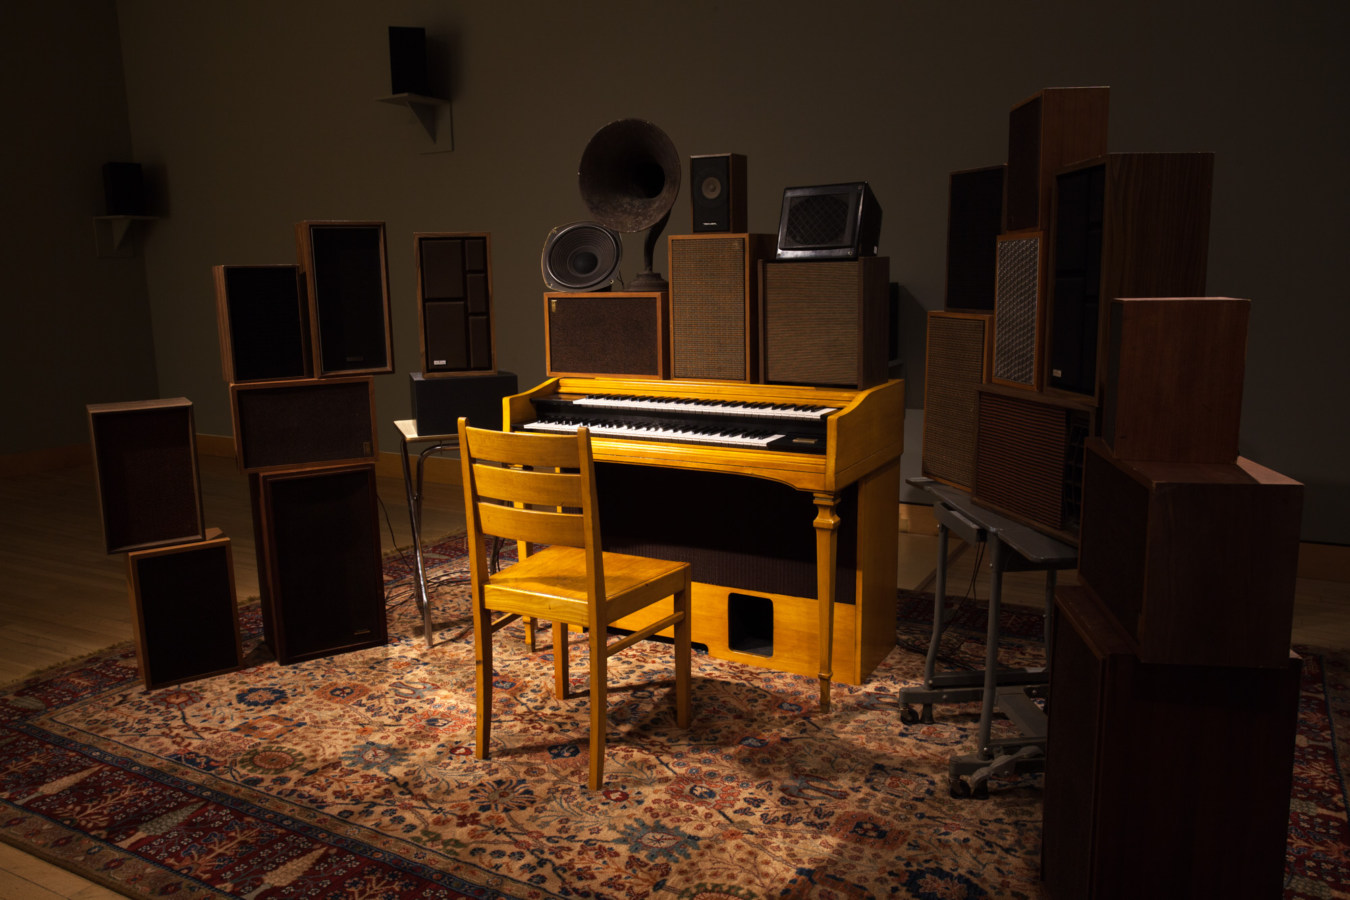 Color image of an organ surrounded by speakers of various sizes and vintages, and an empty chair on an ornate carpet